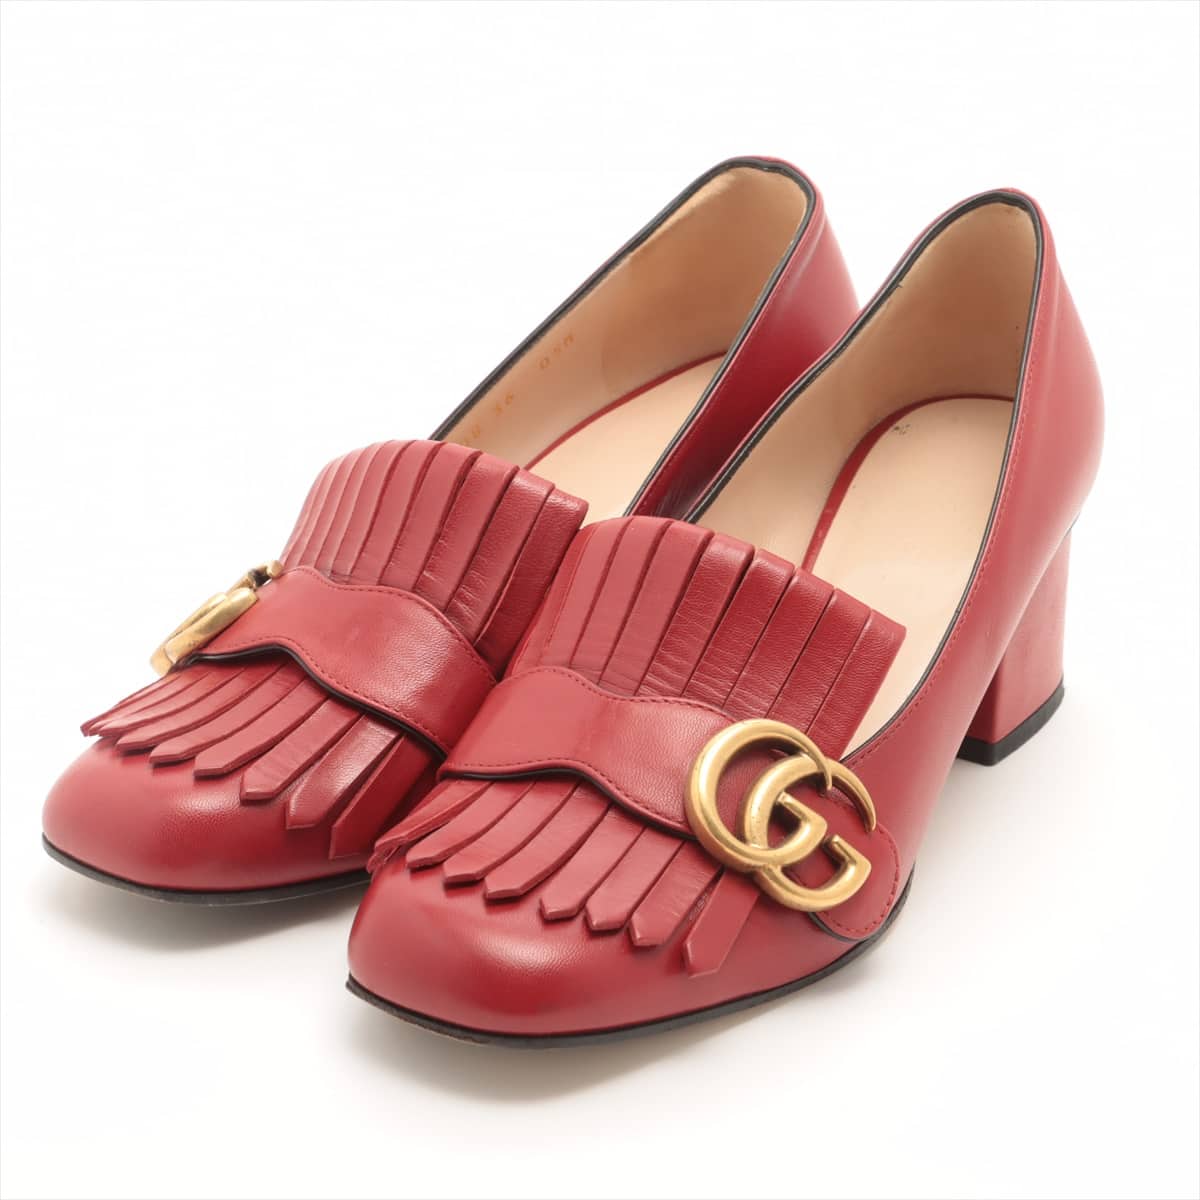 Gucci GG Marmont Leather Pumps 36 Ladies' Red 408208 Fringe